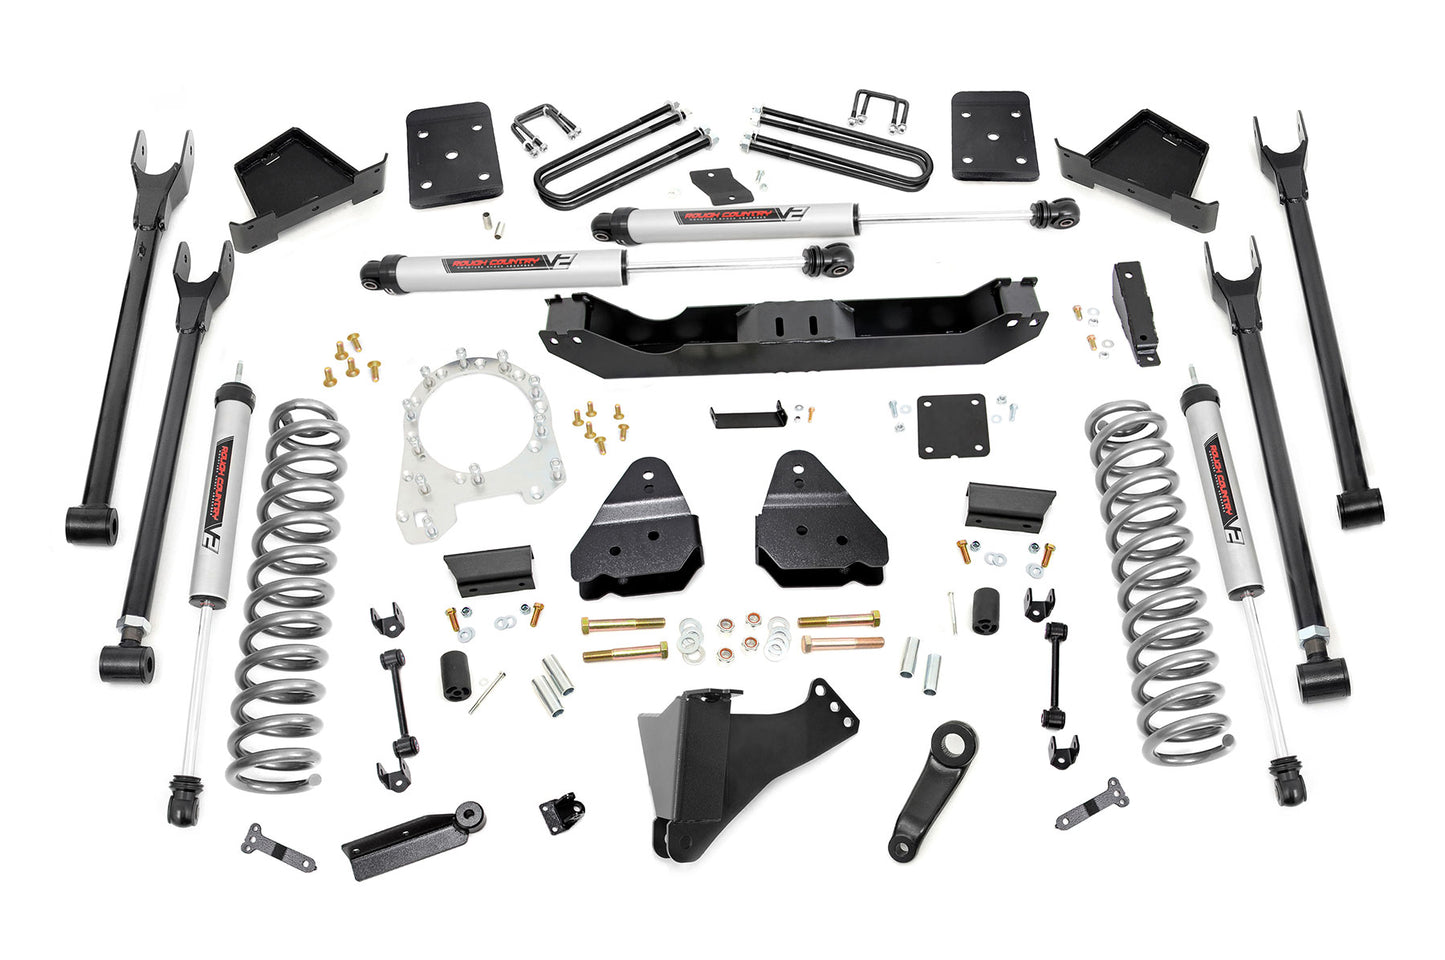 Rough Country (50870) 6 Inch Lift Kit | Diesel | 4 Link | V2 | Ford F-250/F-350 Super Duty (17-22)